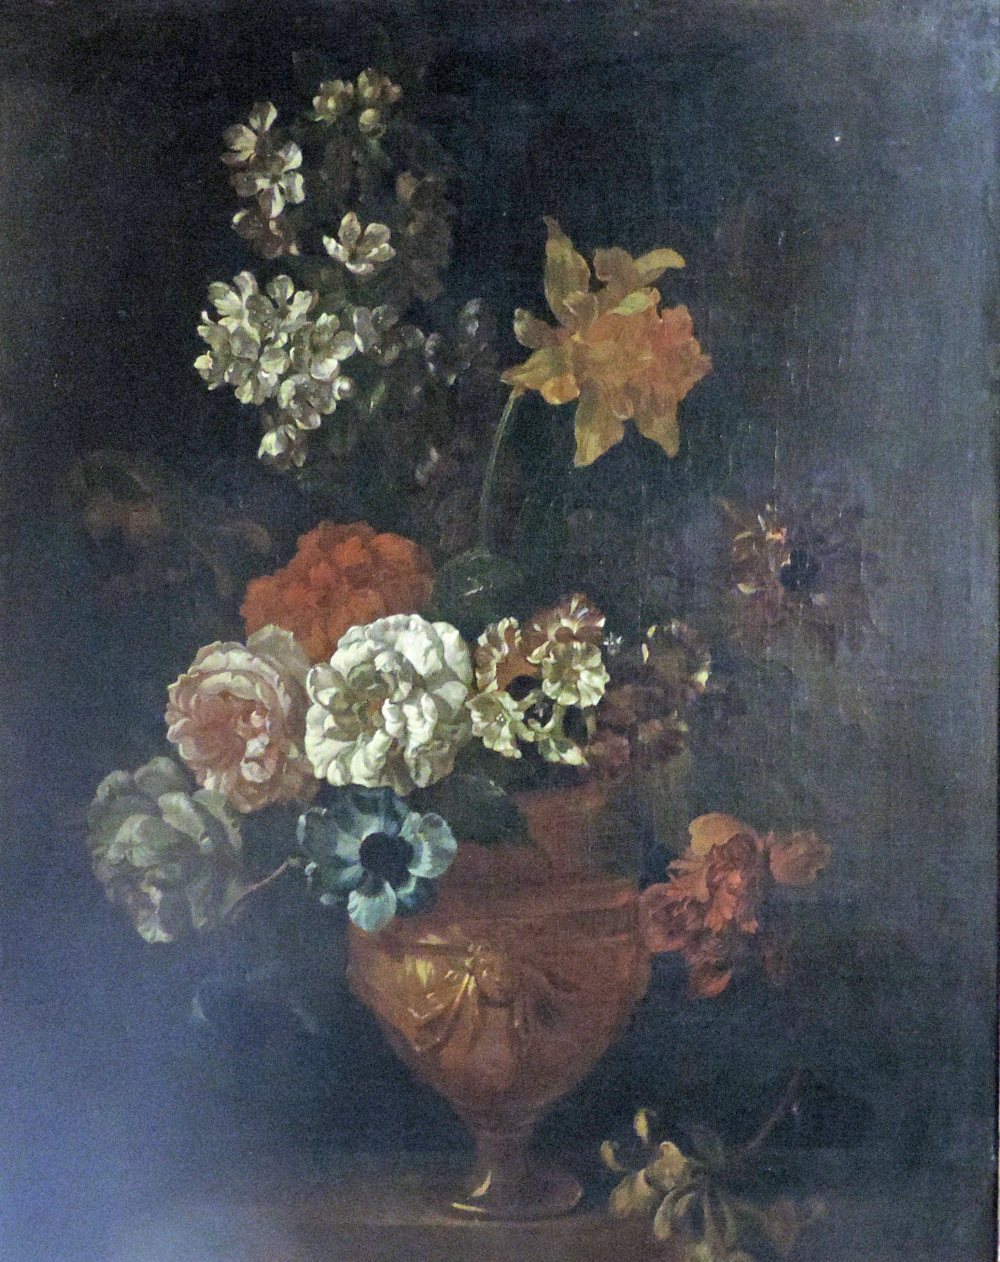 18th Century Dutch School

Still Life, "Chrysanthemums, Daffodils and other Flowers in an ornate